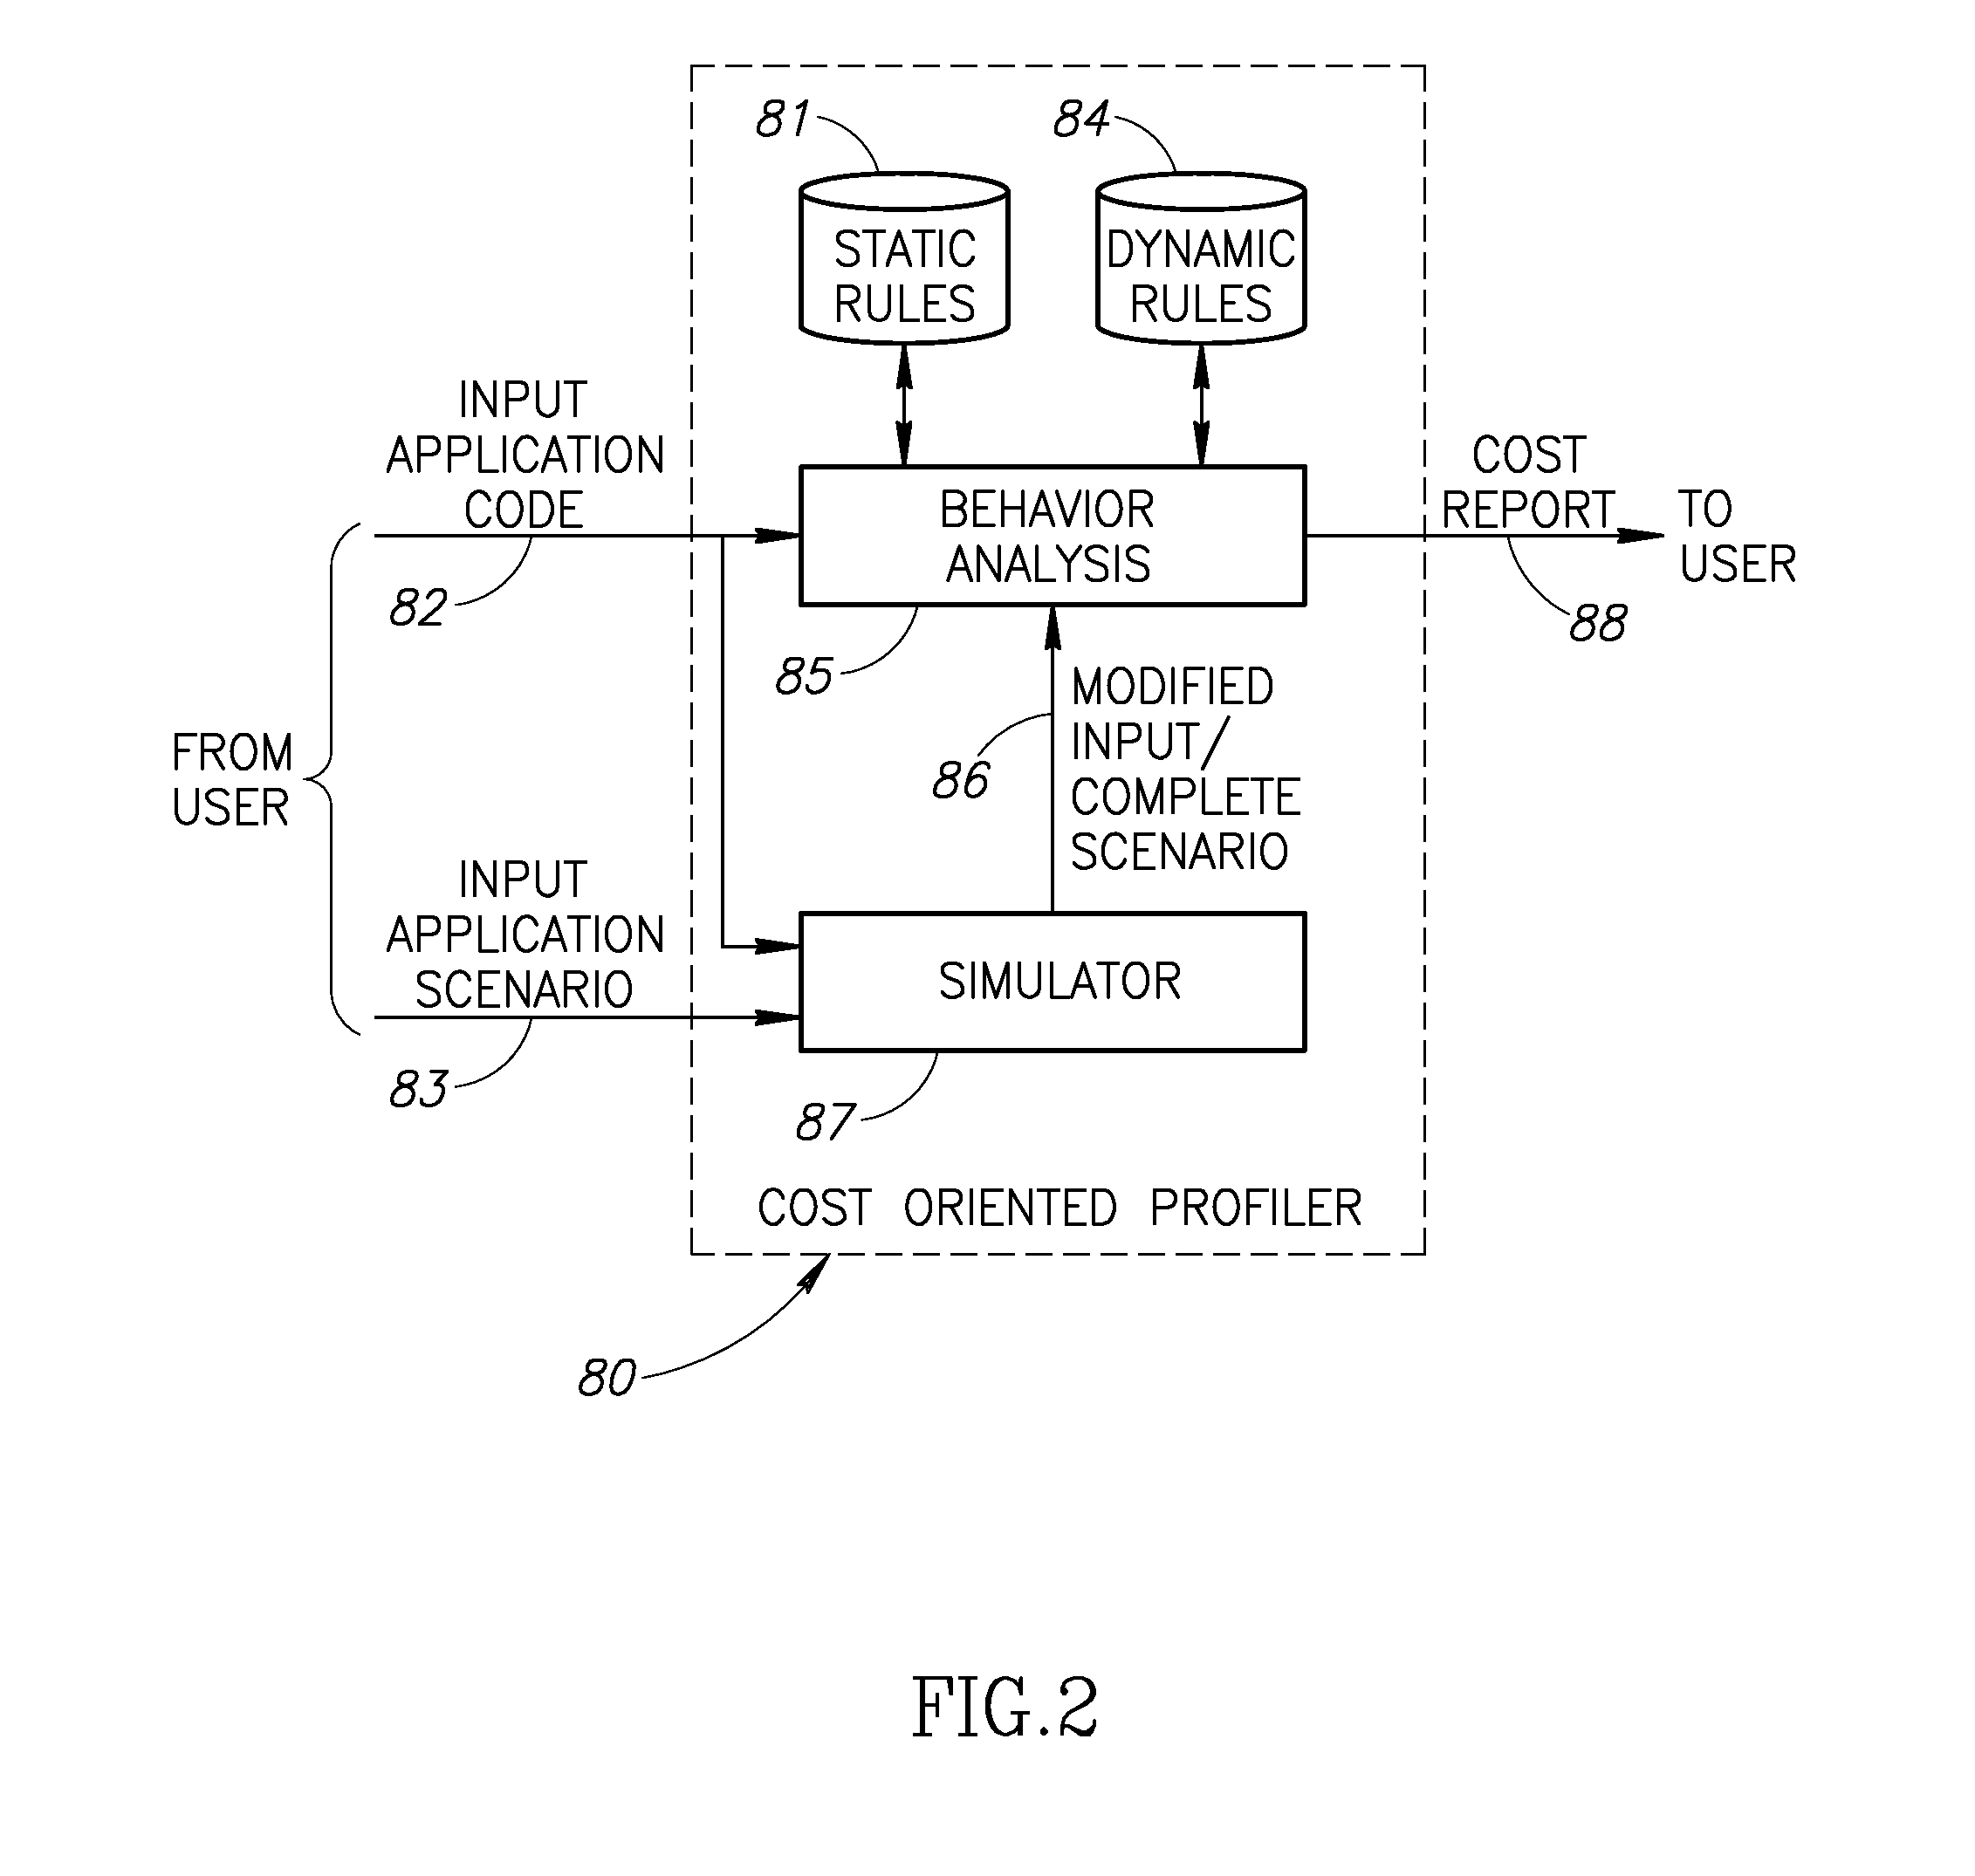 System and method of cost oriented software profiling